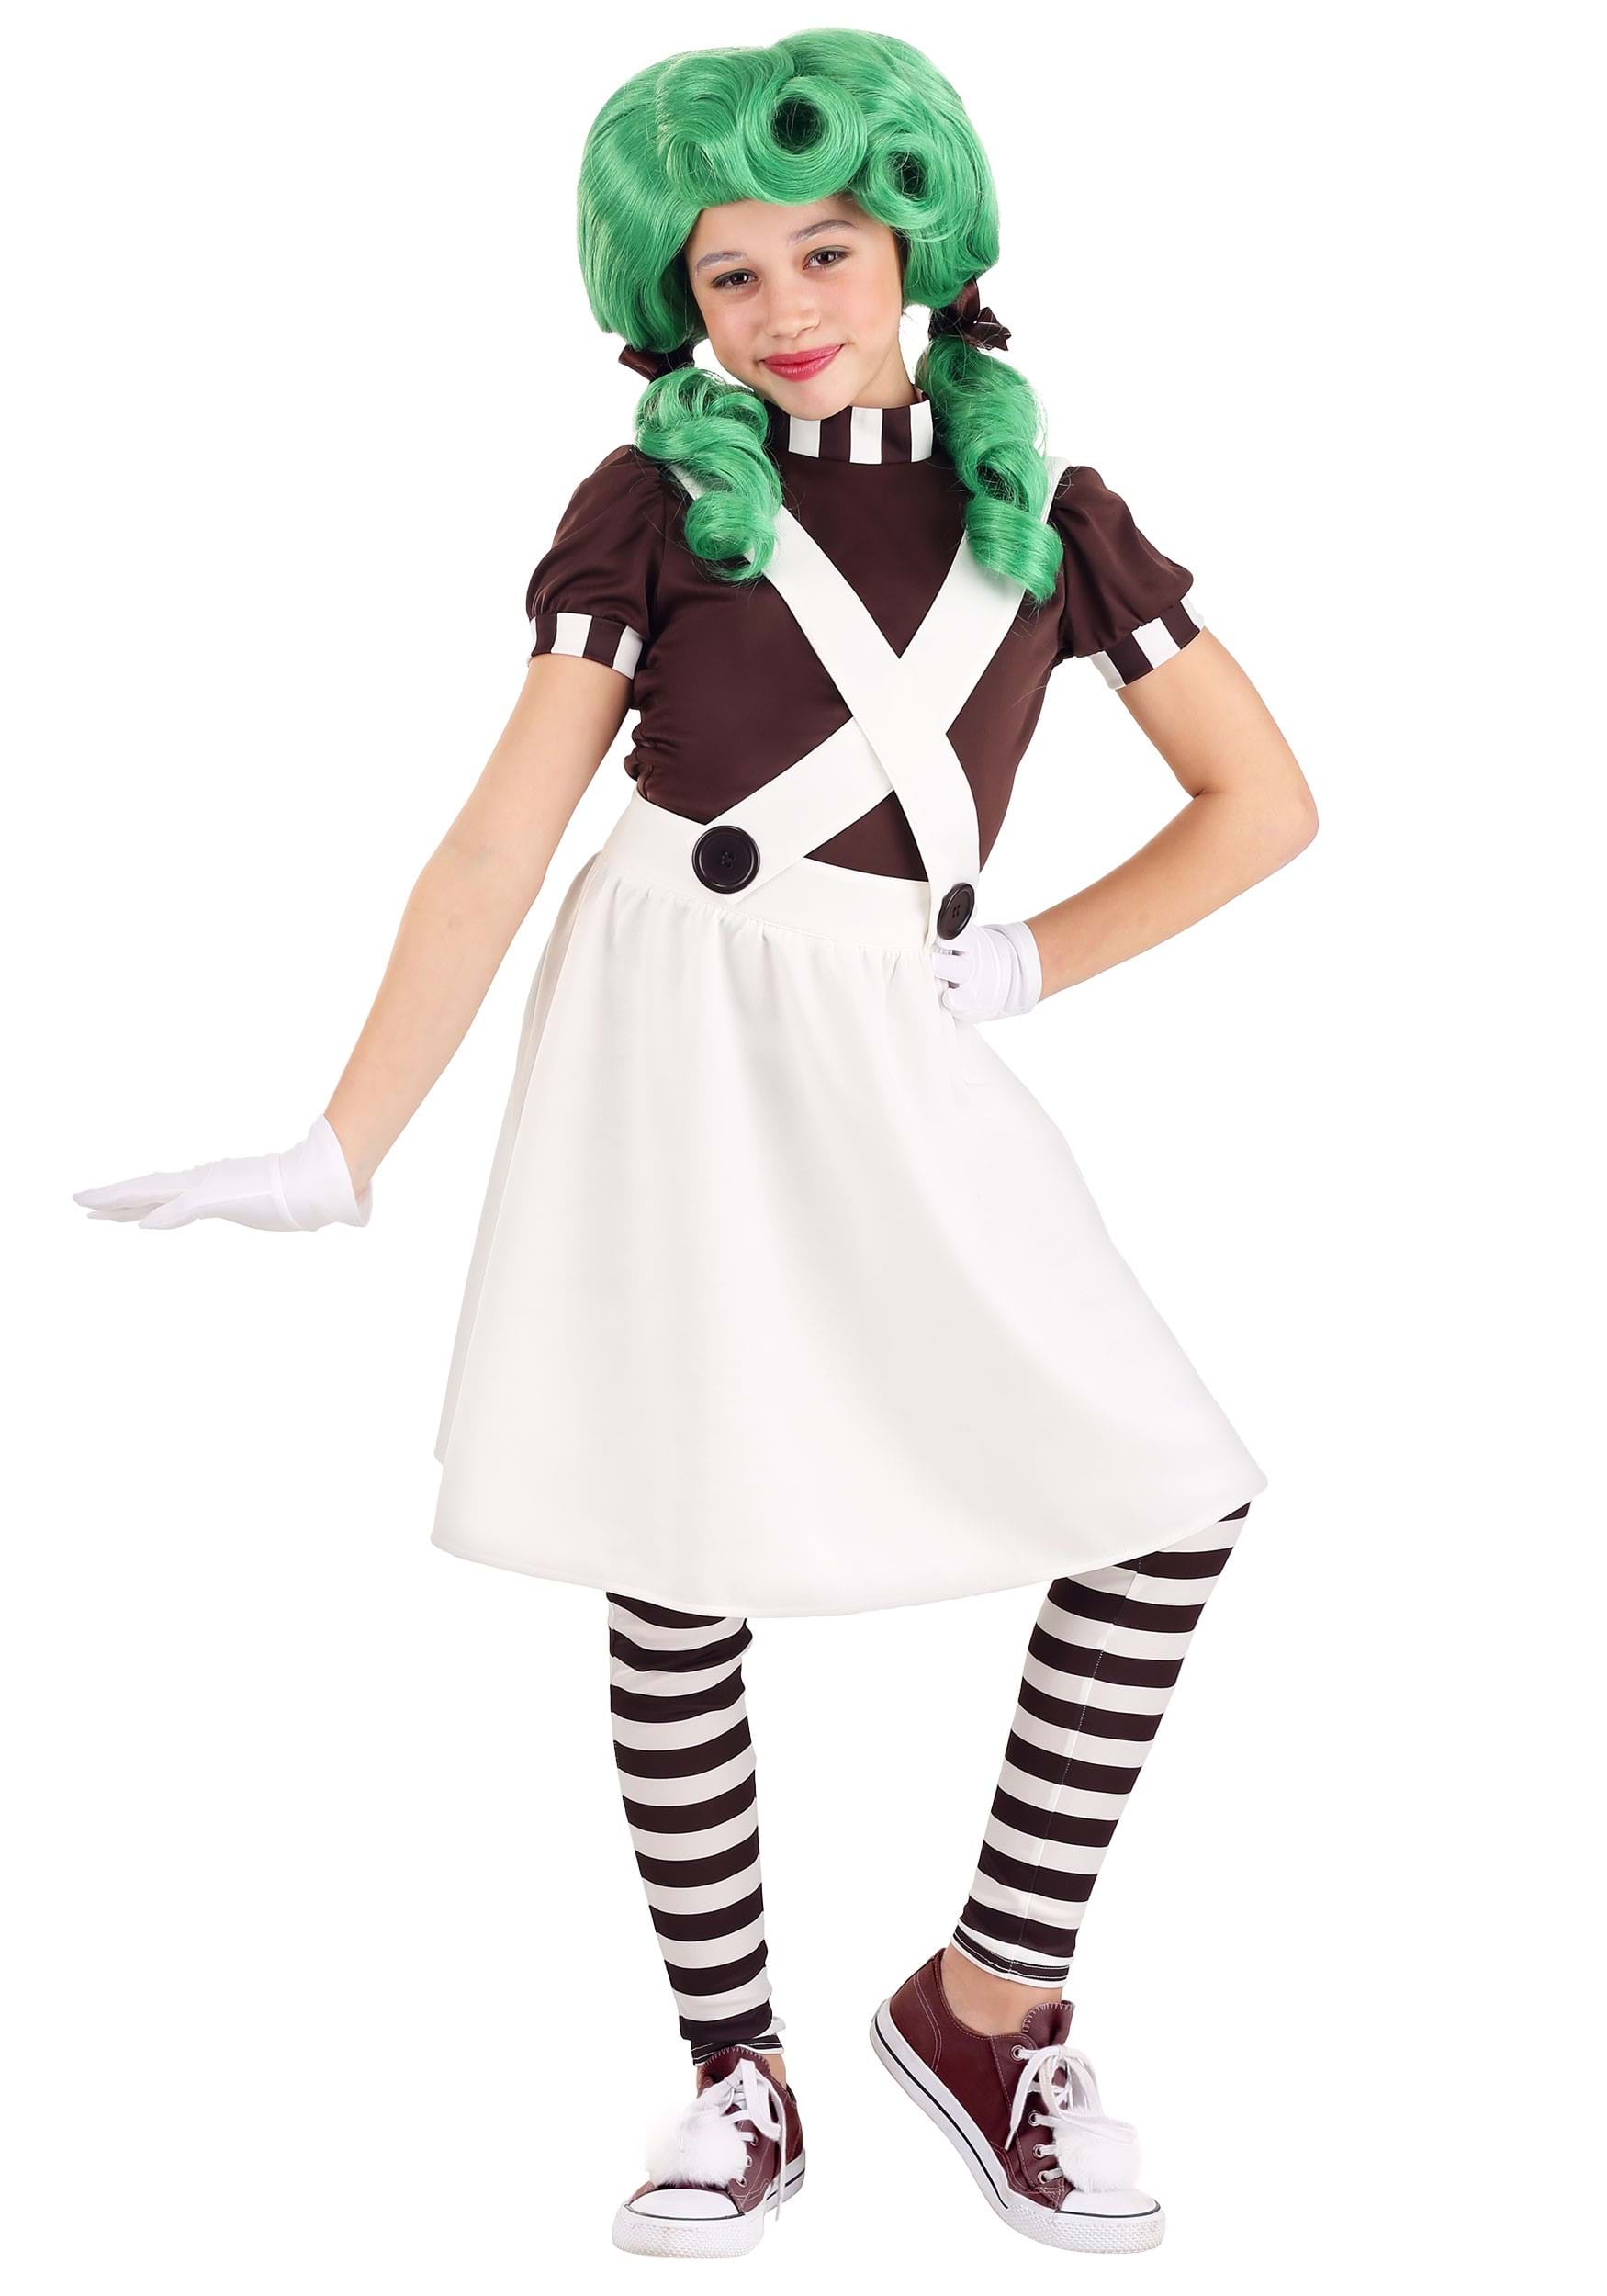 Photos - Fancy Dress WORKER FUN Costumes Girl's Chocolate Factory  Costume Dress Brown/White 